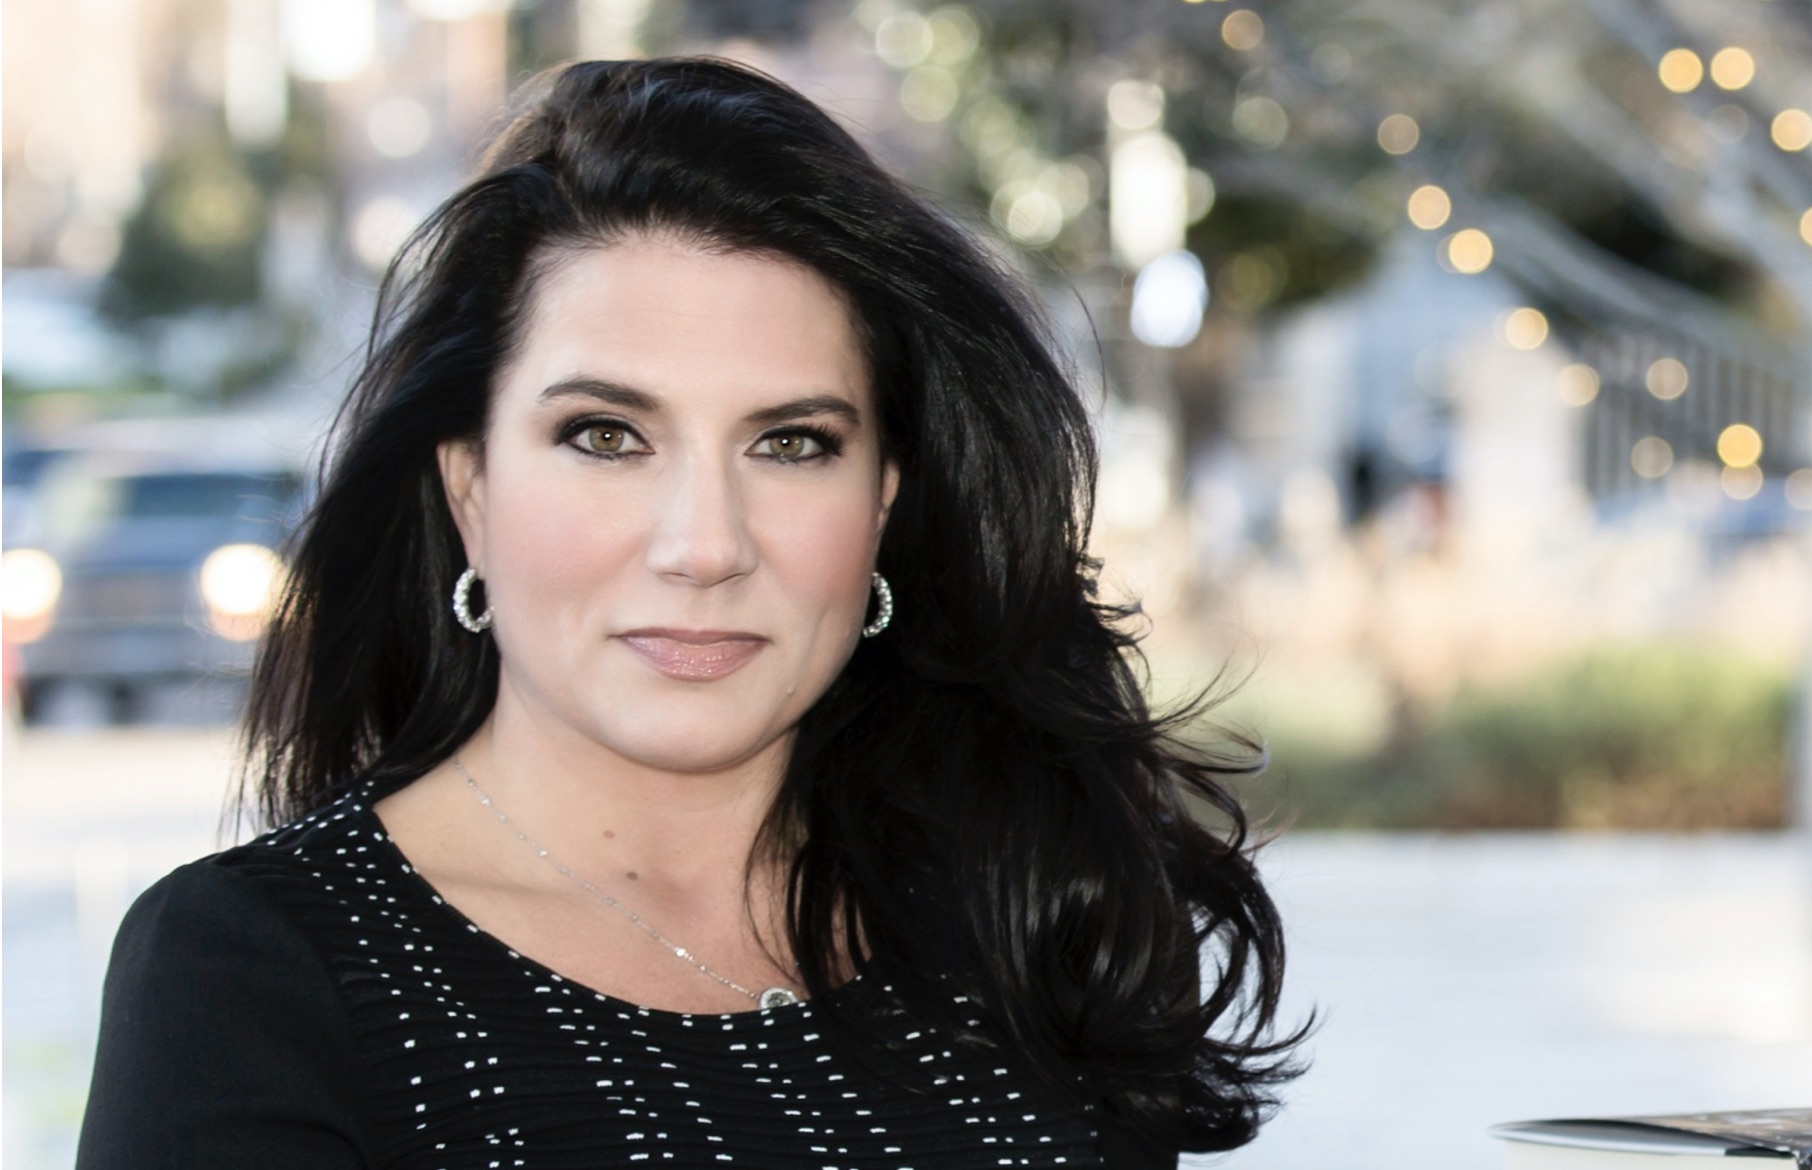 Danielle DiMartino Booth – This Is Why There Will Be A Big Bull Market